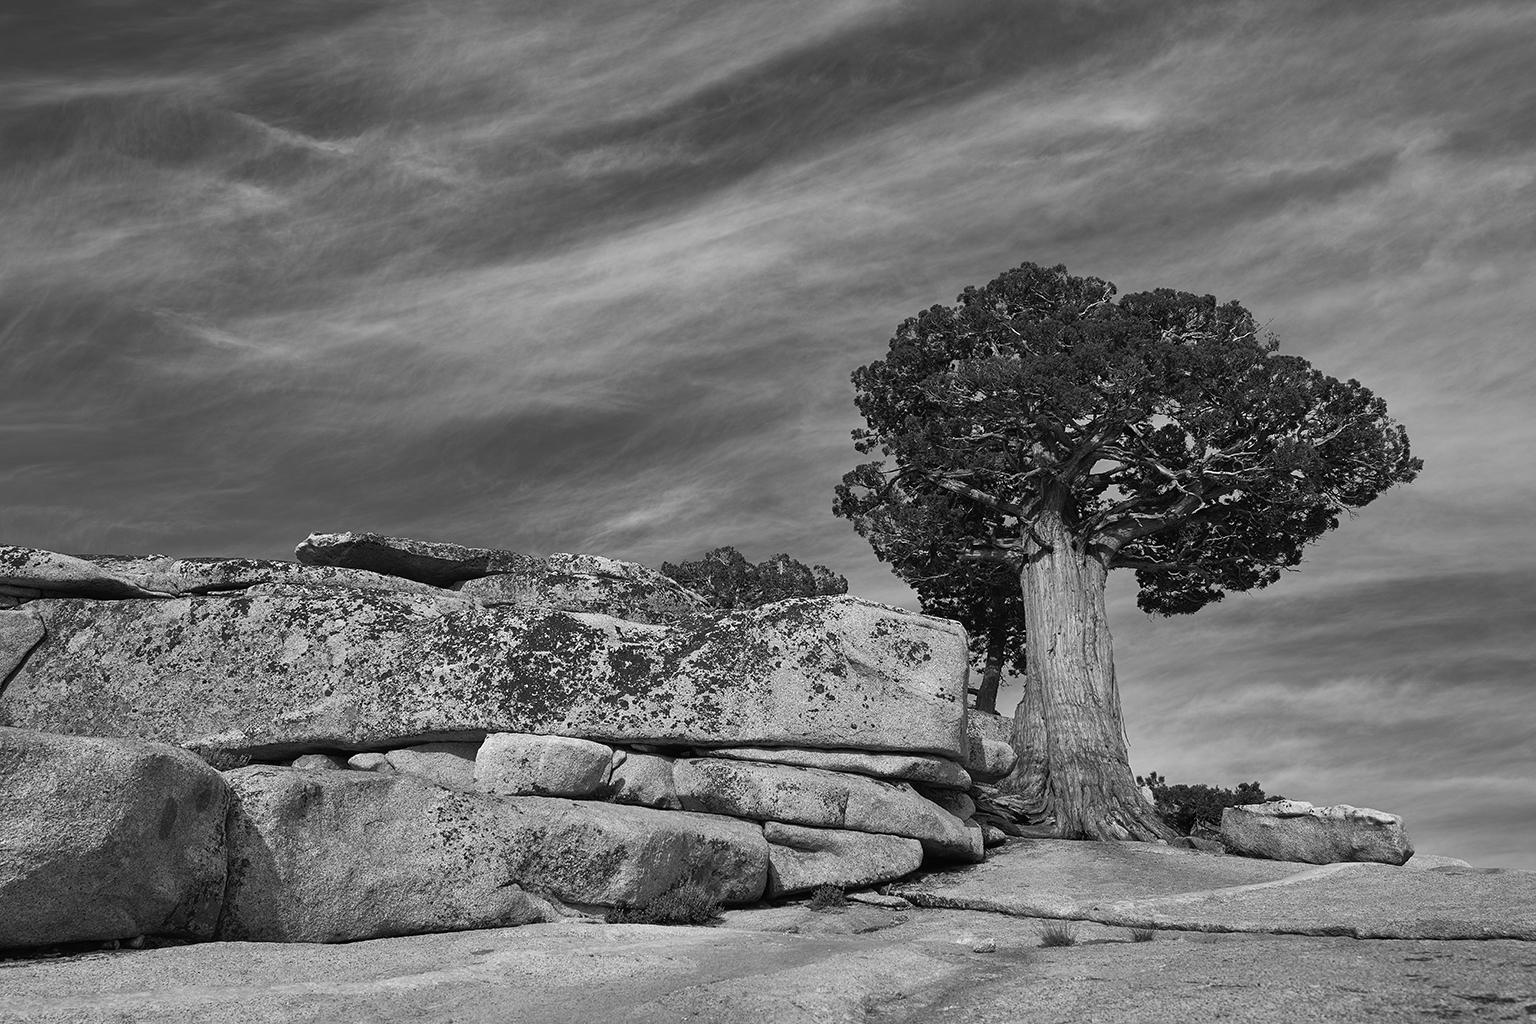 Tree Study IV - large format b/w photograph of lone ancient tree in landscape - Contemporary Photograph by Frank Schott